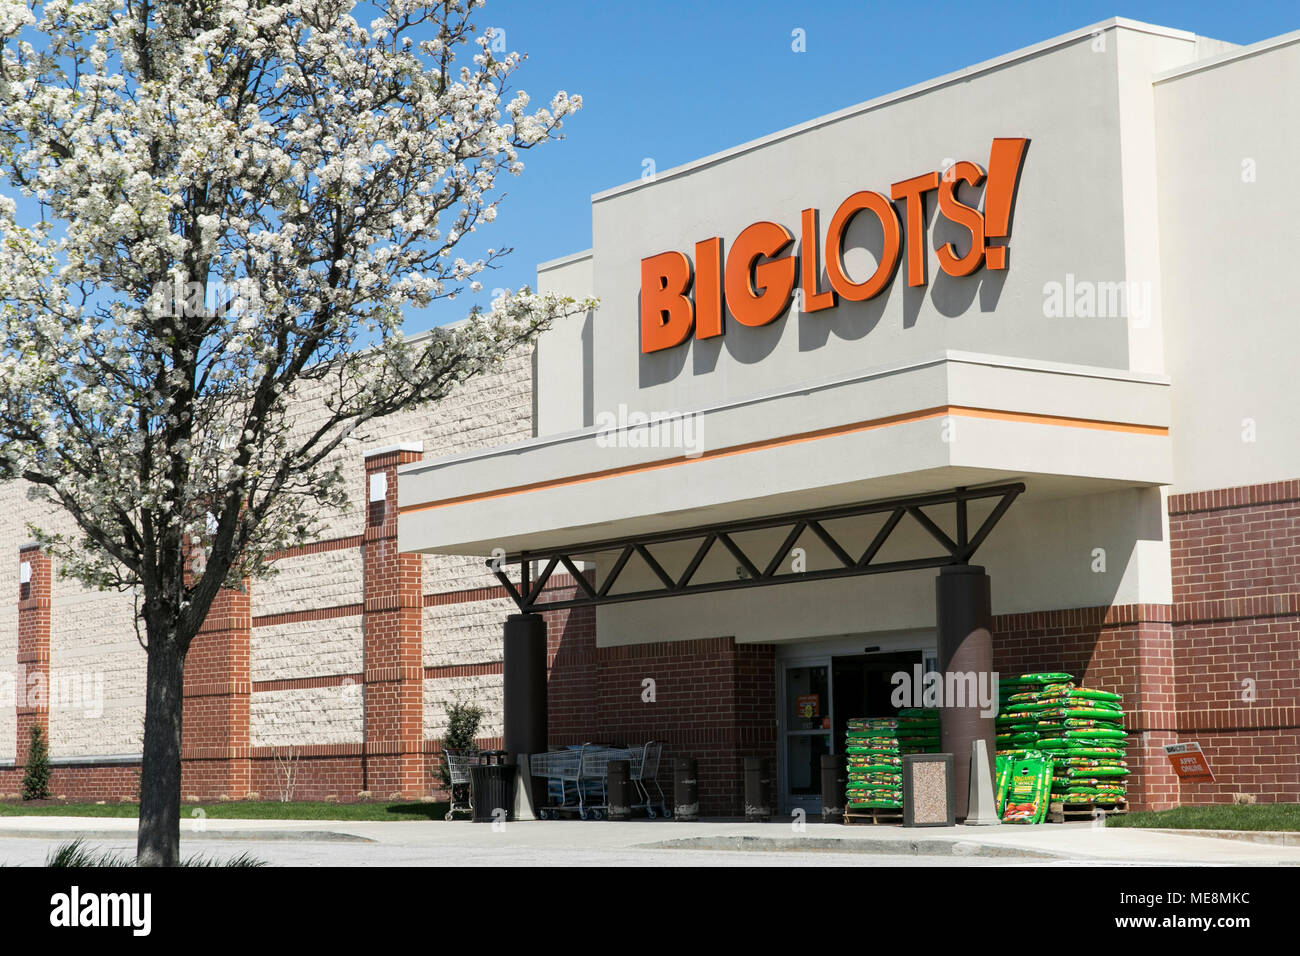 A logo sign outside of a Big Lots retail store location in Columbia, Maryland on April 20, 2018. Stock Photo